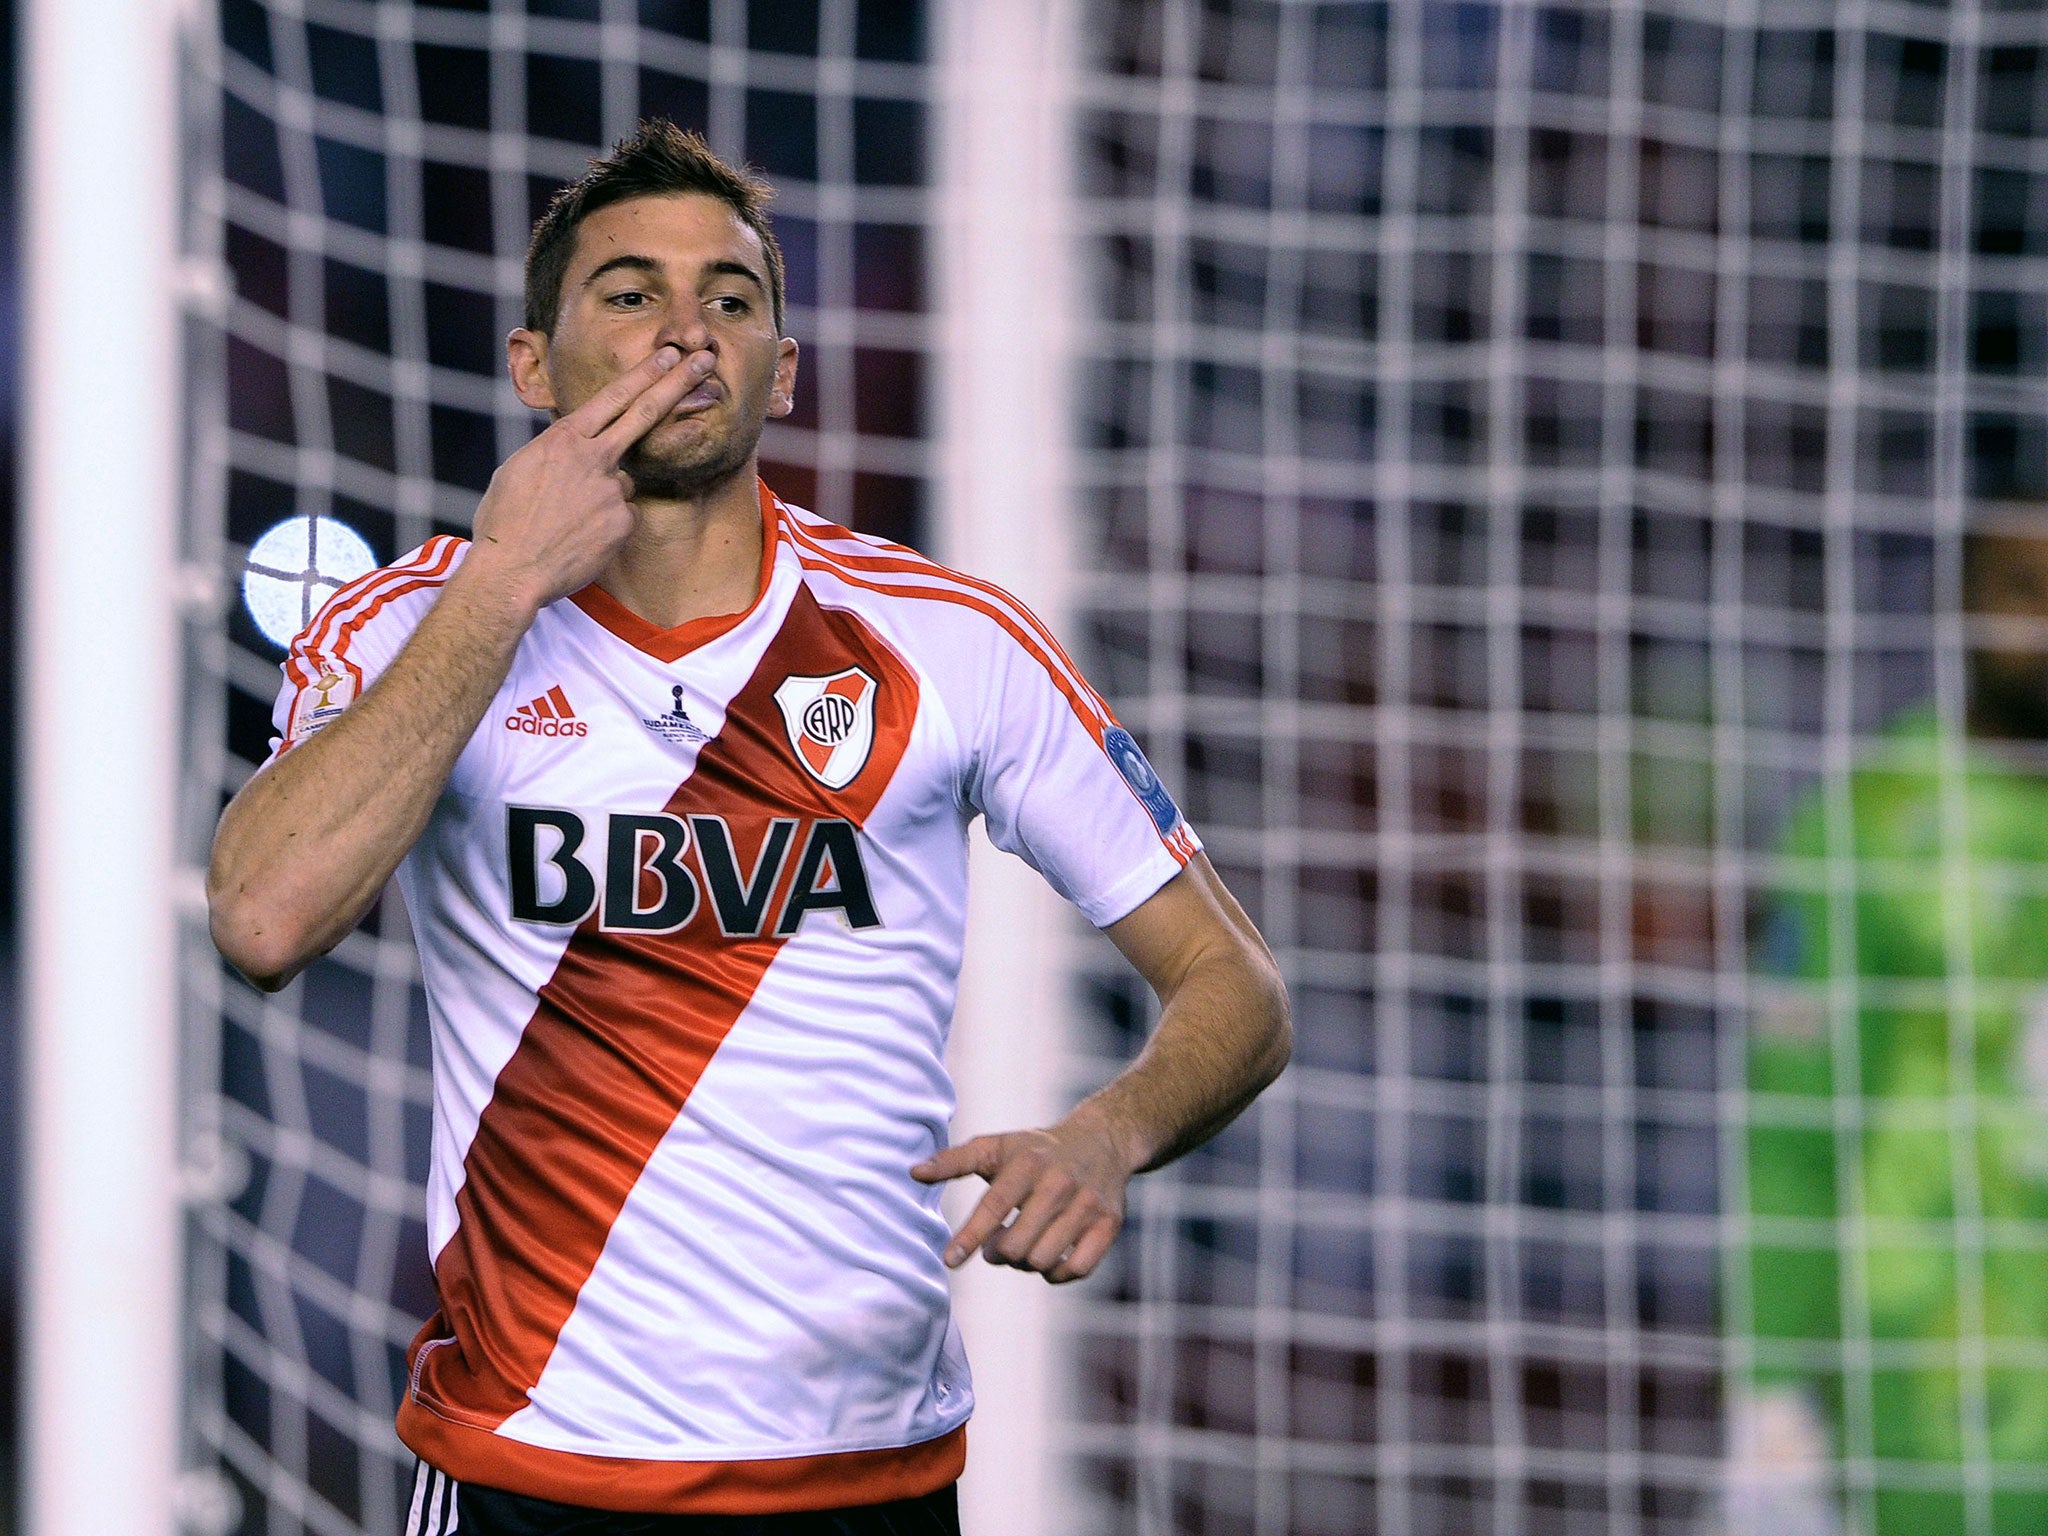 Lucas Alario has emerged as one of Argentina's rising talents